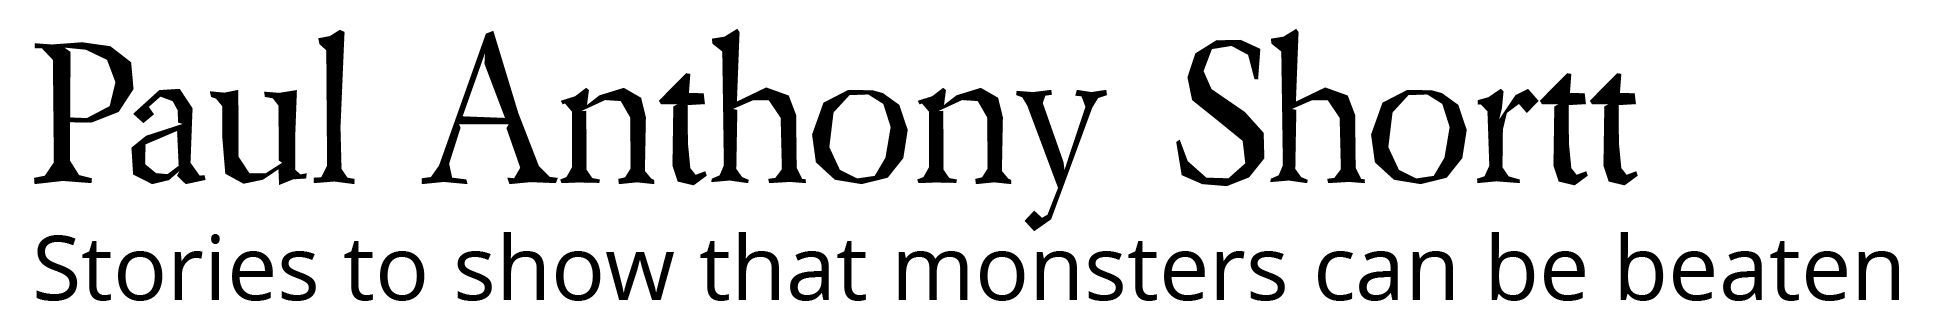 Website title, reading "Paul Anthony Shortt, stories to show that monsters can be beaten"